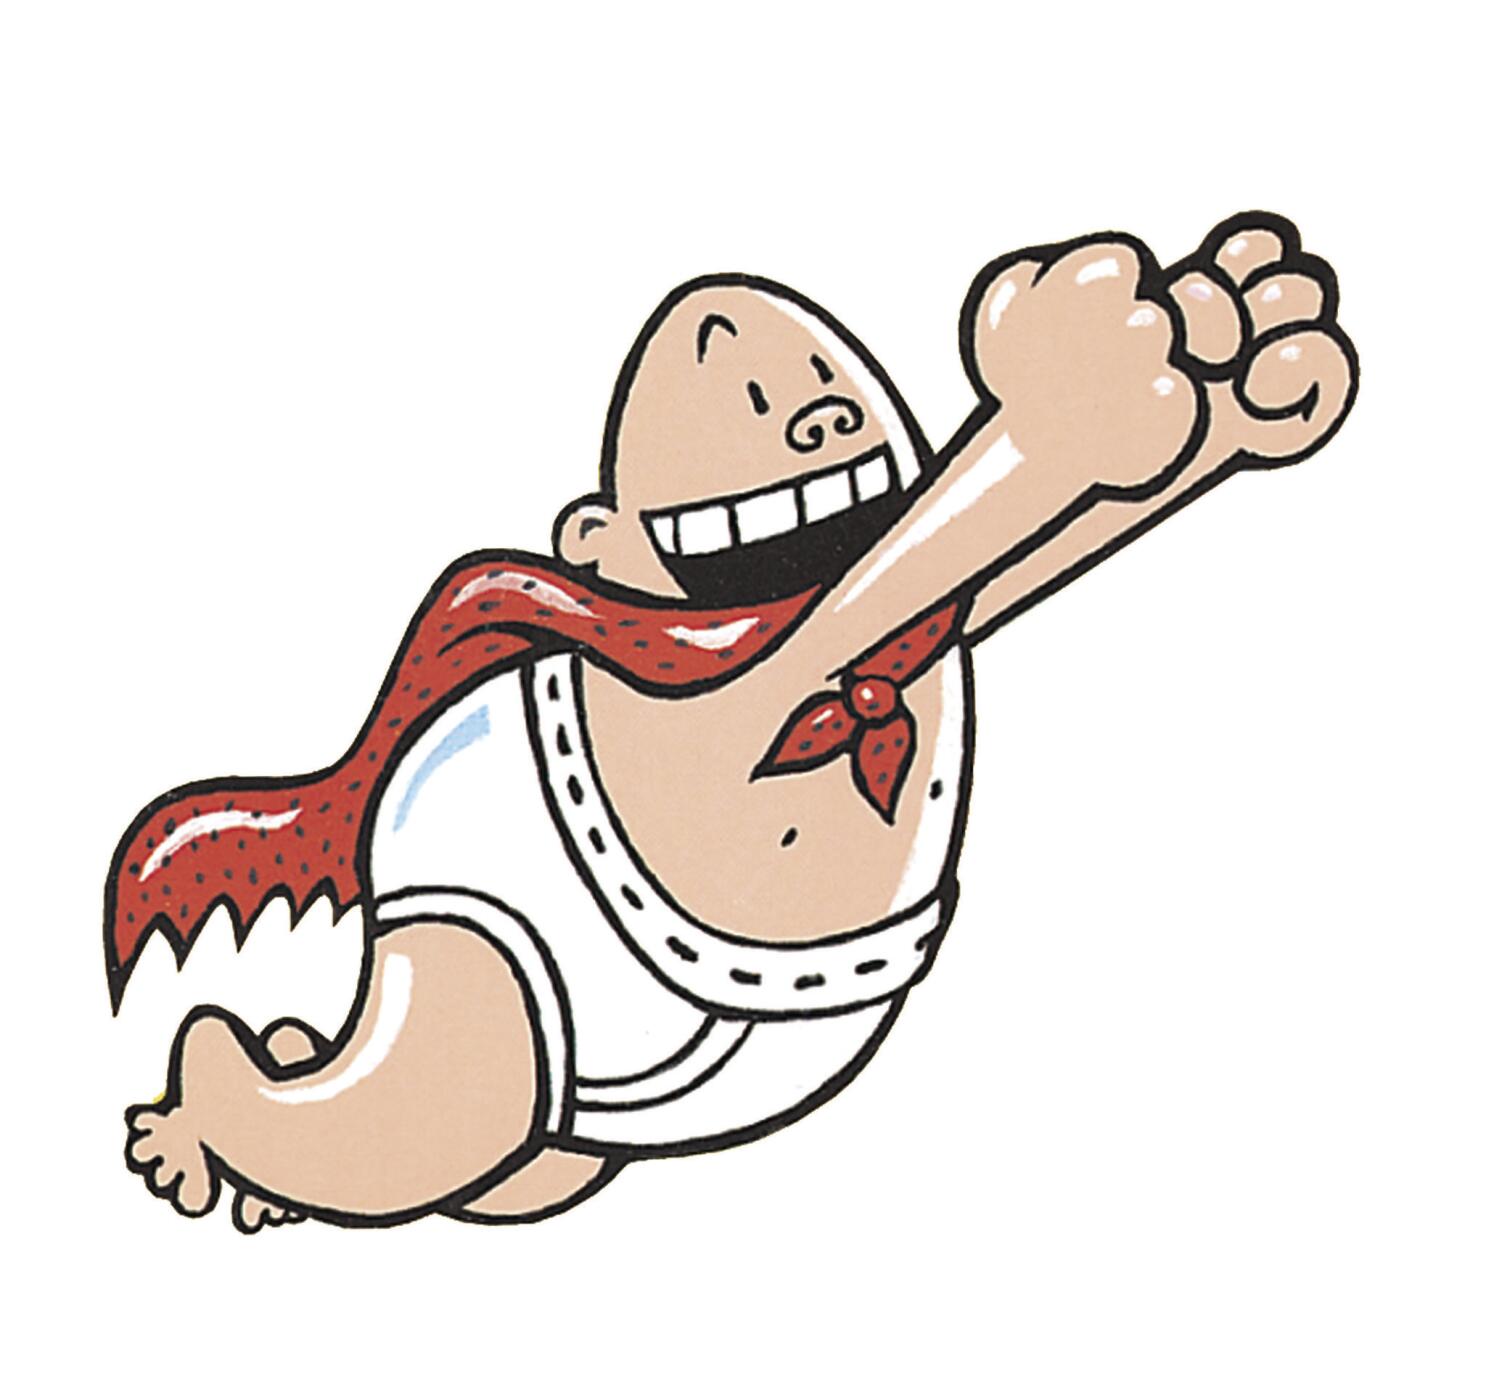 Captain Underpants' banned from school book fair over gay